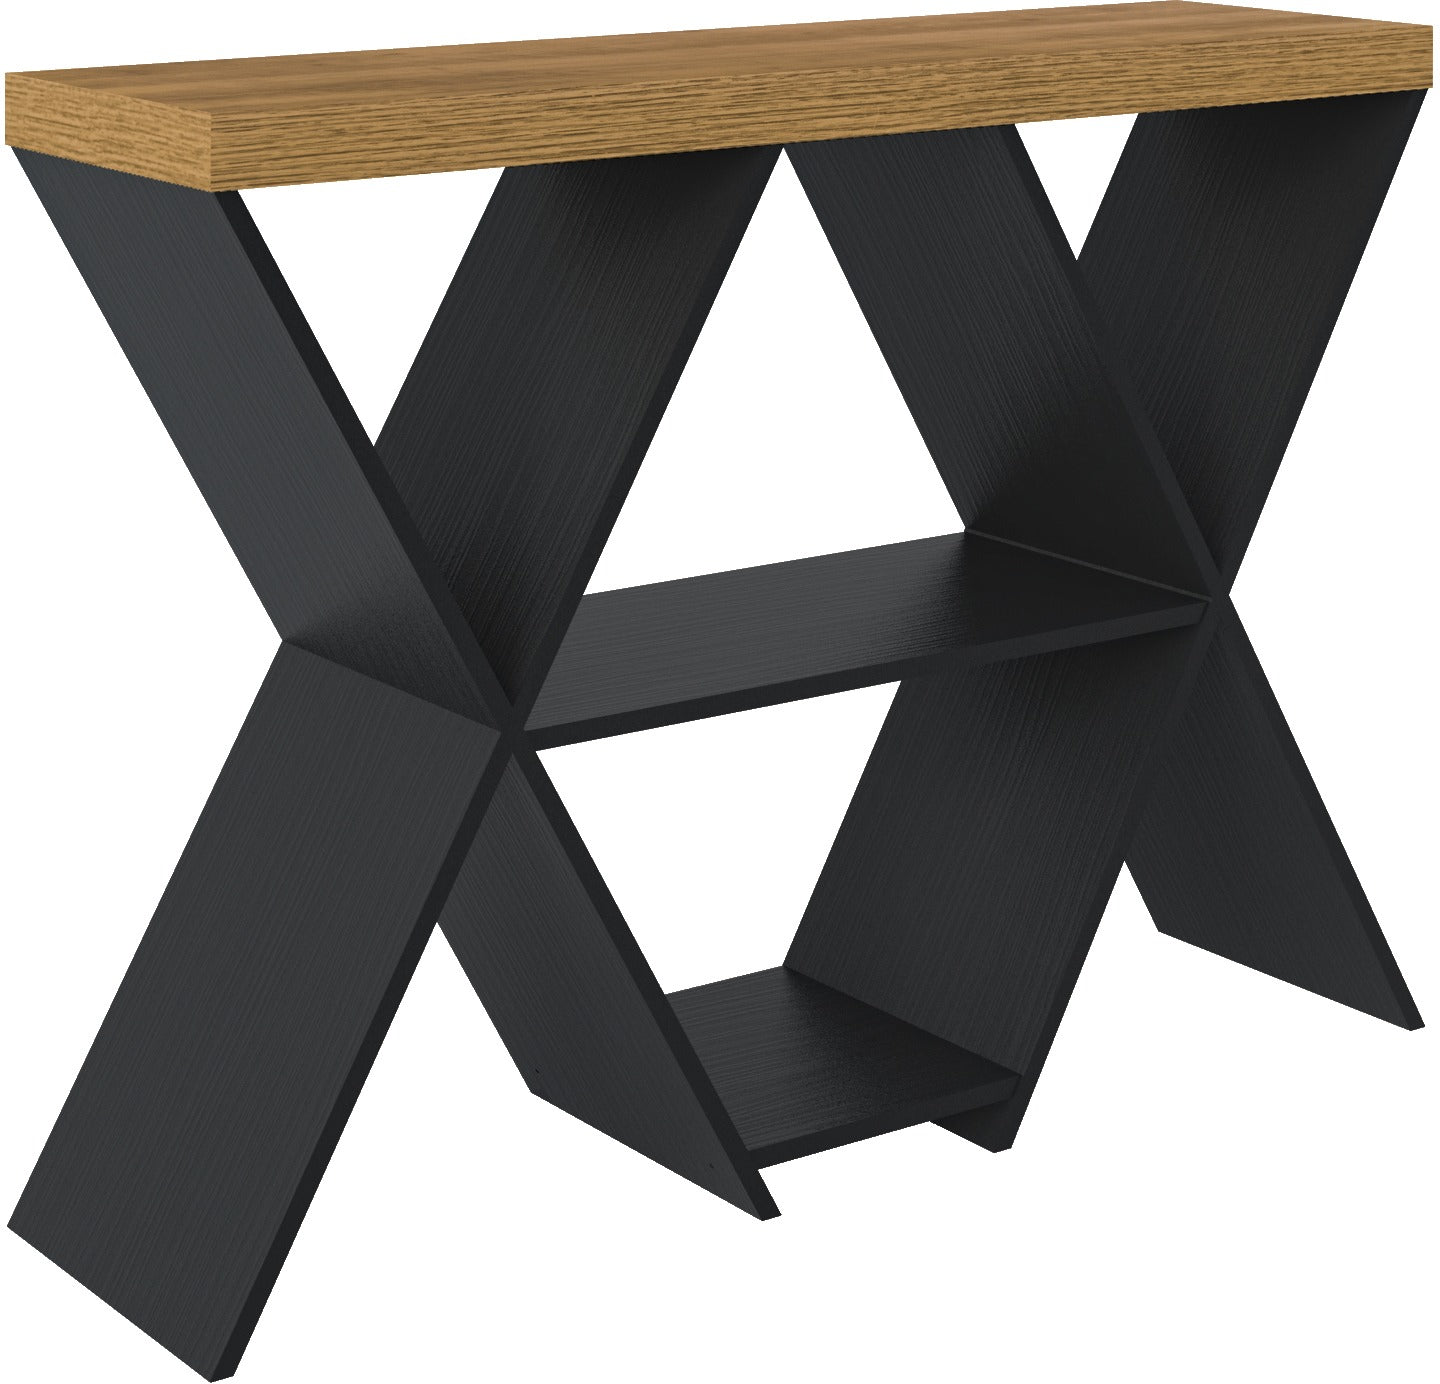 NAPLES-CONSOLE-TABLE-BLACK-AND-PINE-EFFECT-2021-300-304-027-1.jpg